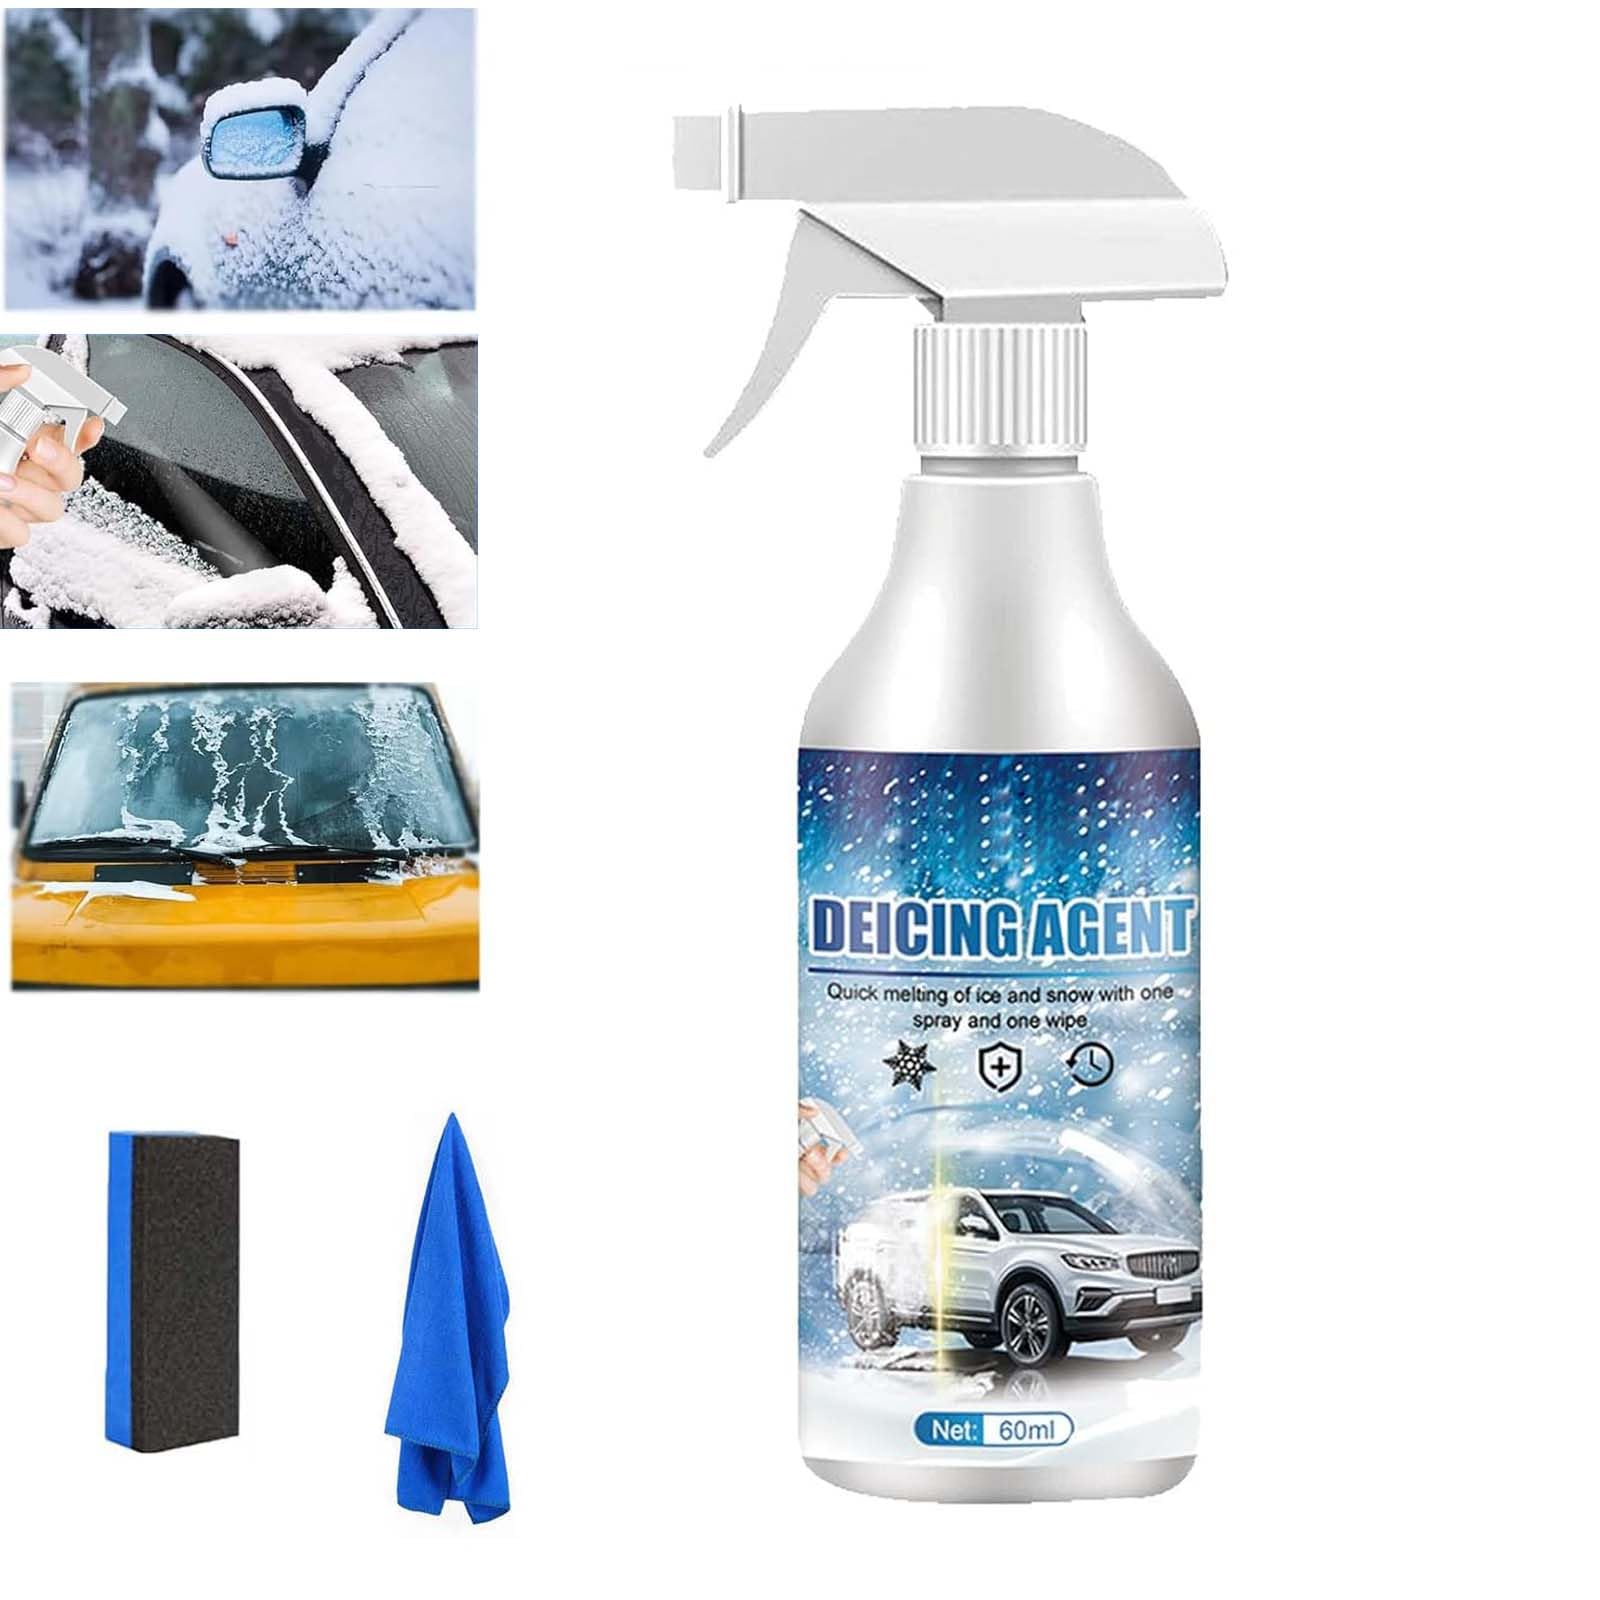 Deicer Spray for Car Windshield, Auto Windshield Deicing Spray, De-Icer Spray, Ice Remover Melting Spray Multi-Purpose Melters Winter Car Essentials for Fast Removing Snow, Ice and Frost (1 PCS) von HIDRUO